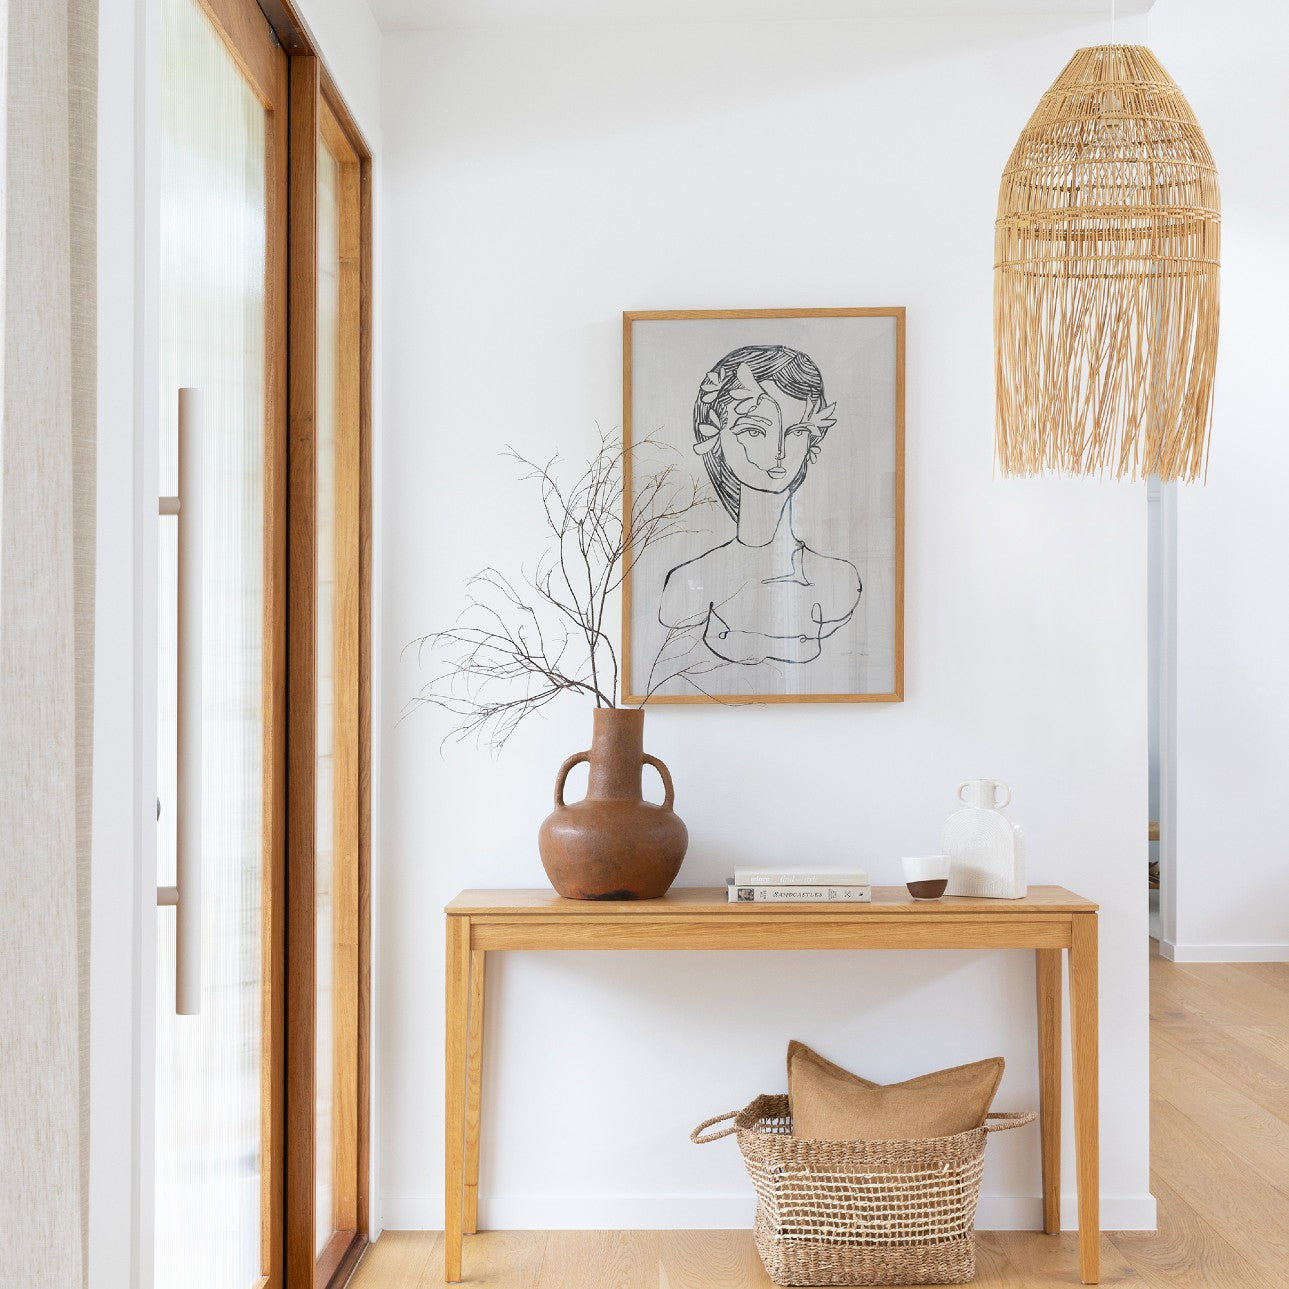 boho lighting. this rattan pendant light shade hangs above a side table next to an artwork of a woman.